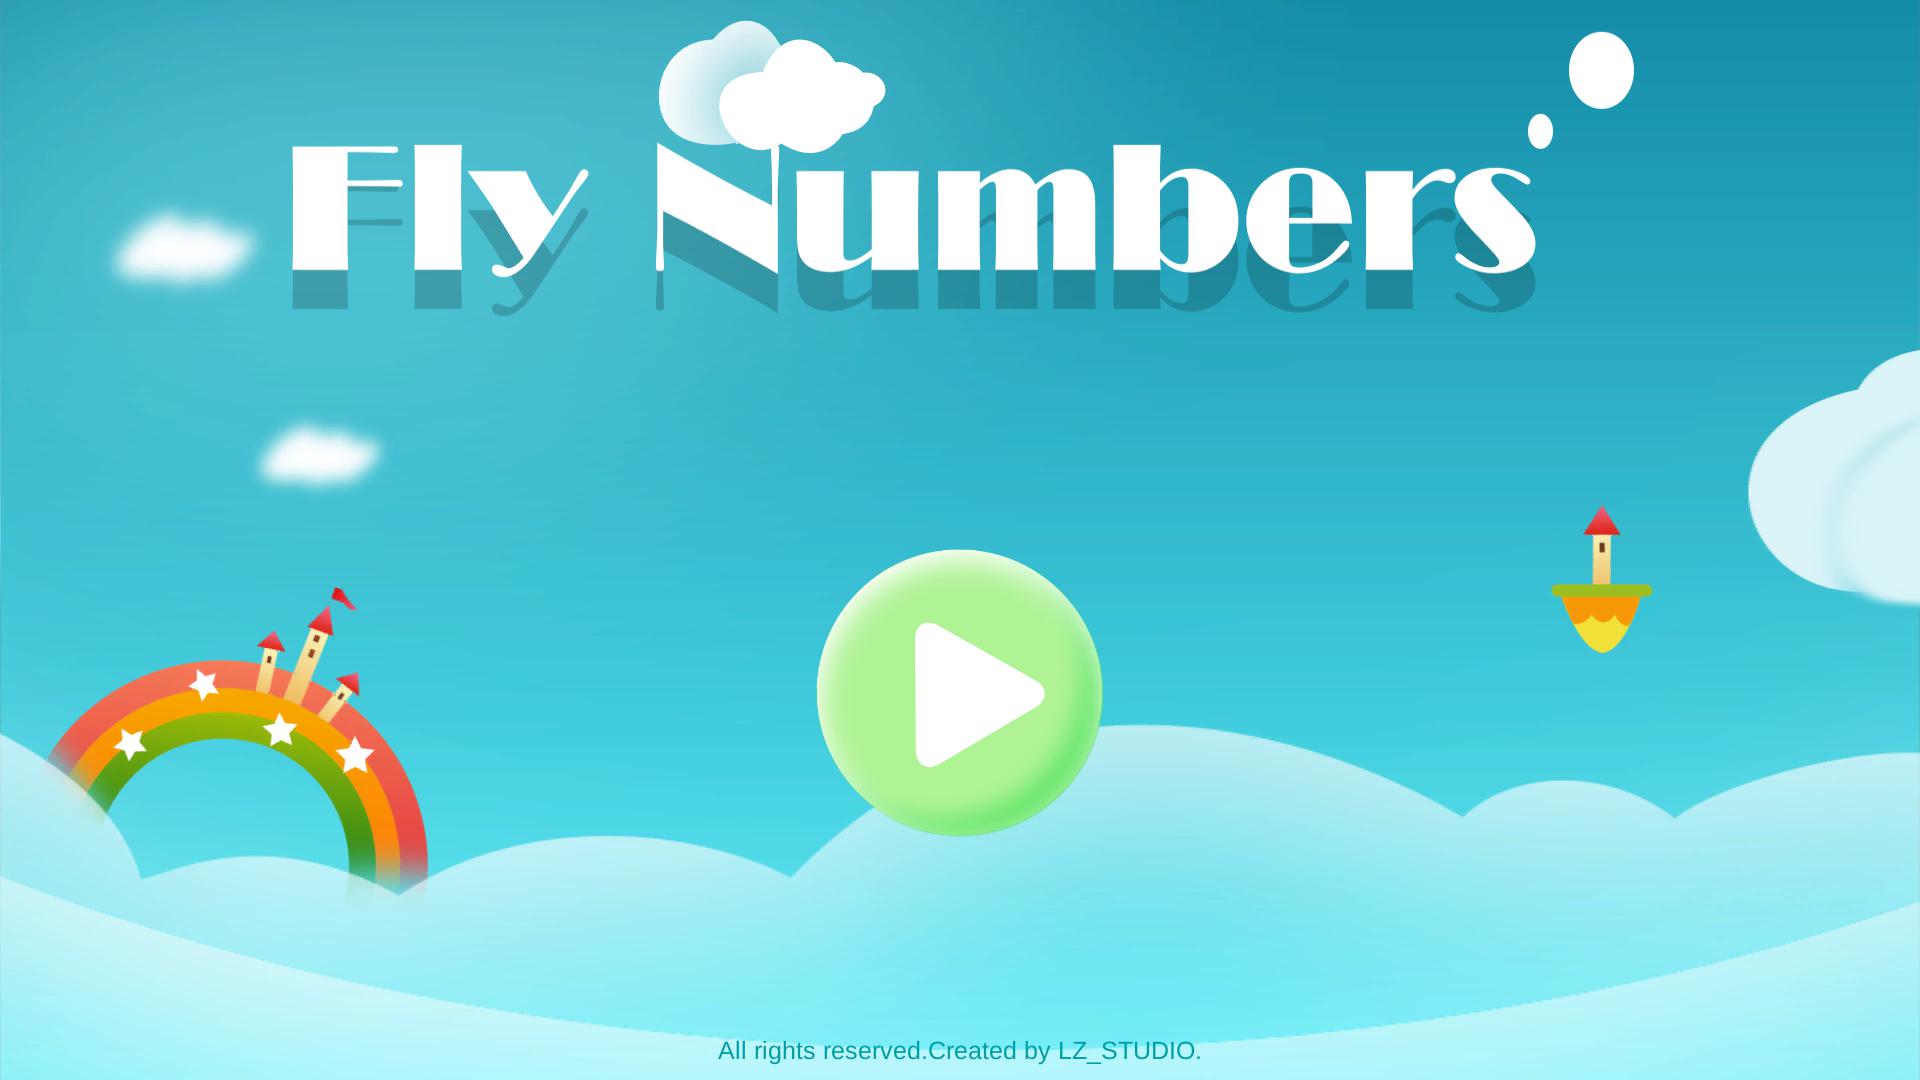 Fly numbers_截图_1